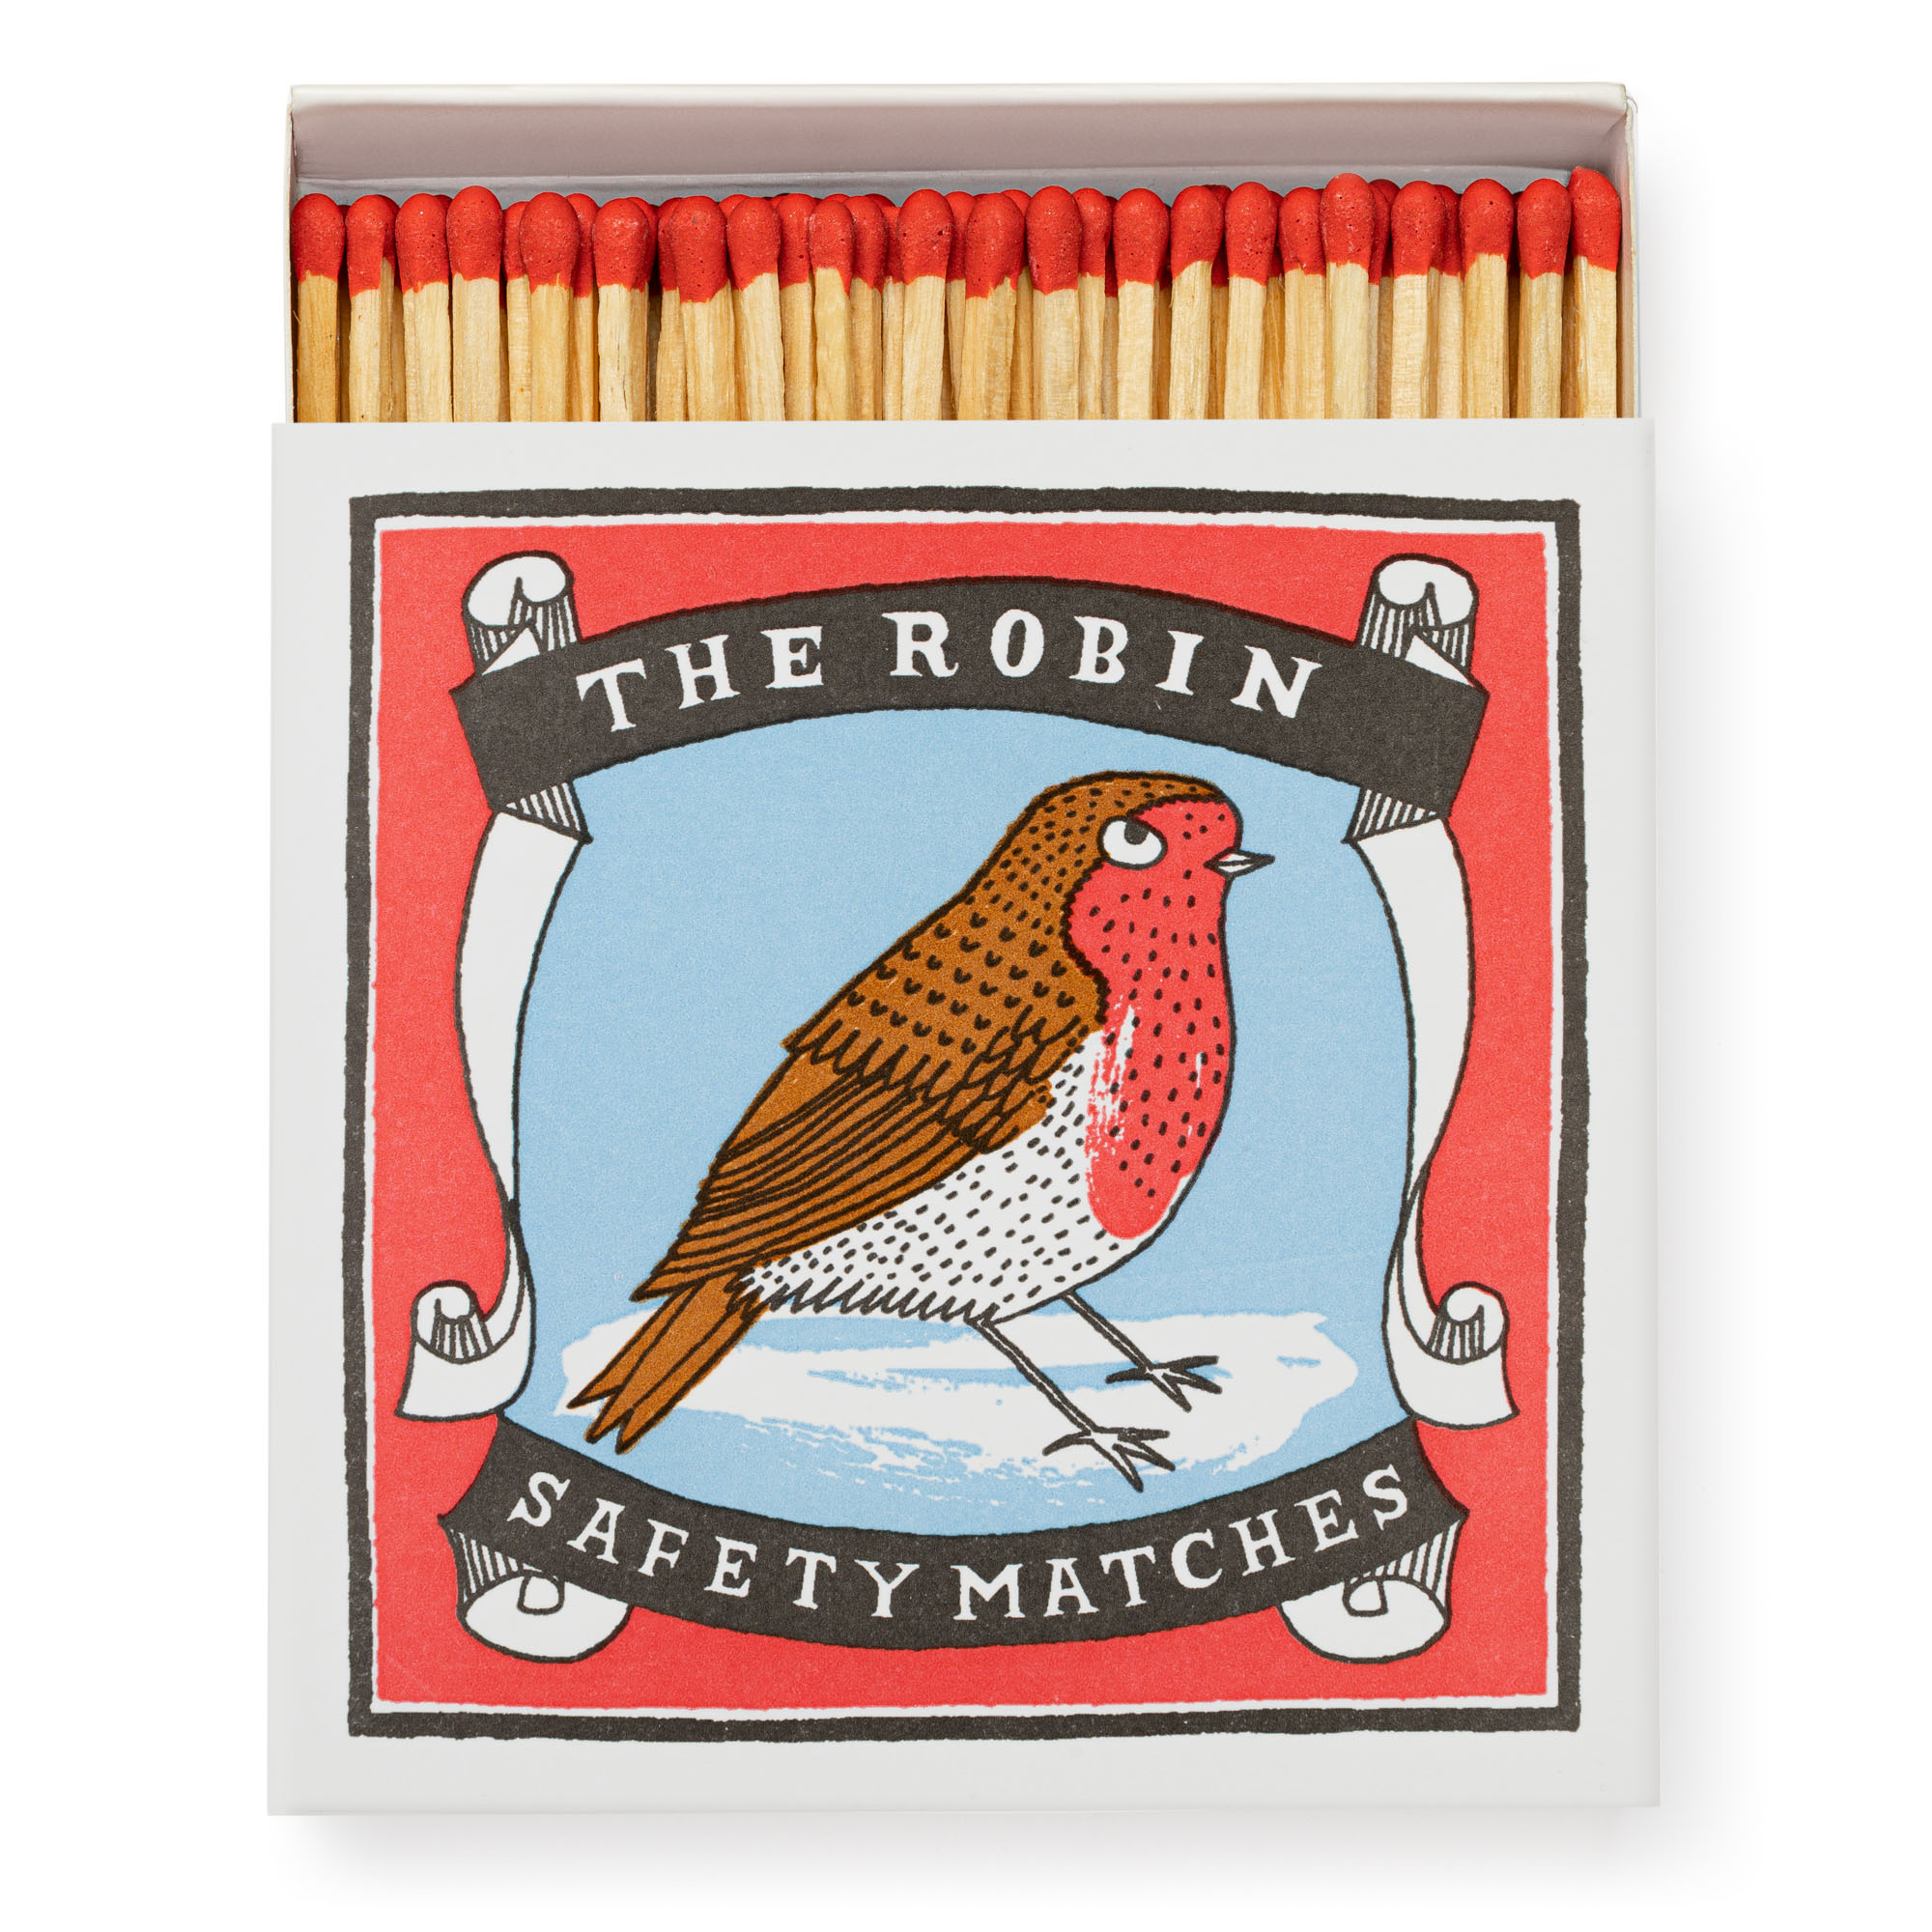 The Robin - Square Matchboxes - Charlotte Farmer - from Archivist Gallery 